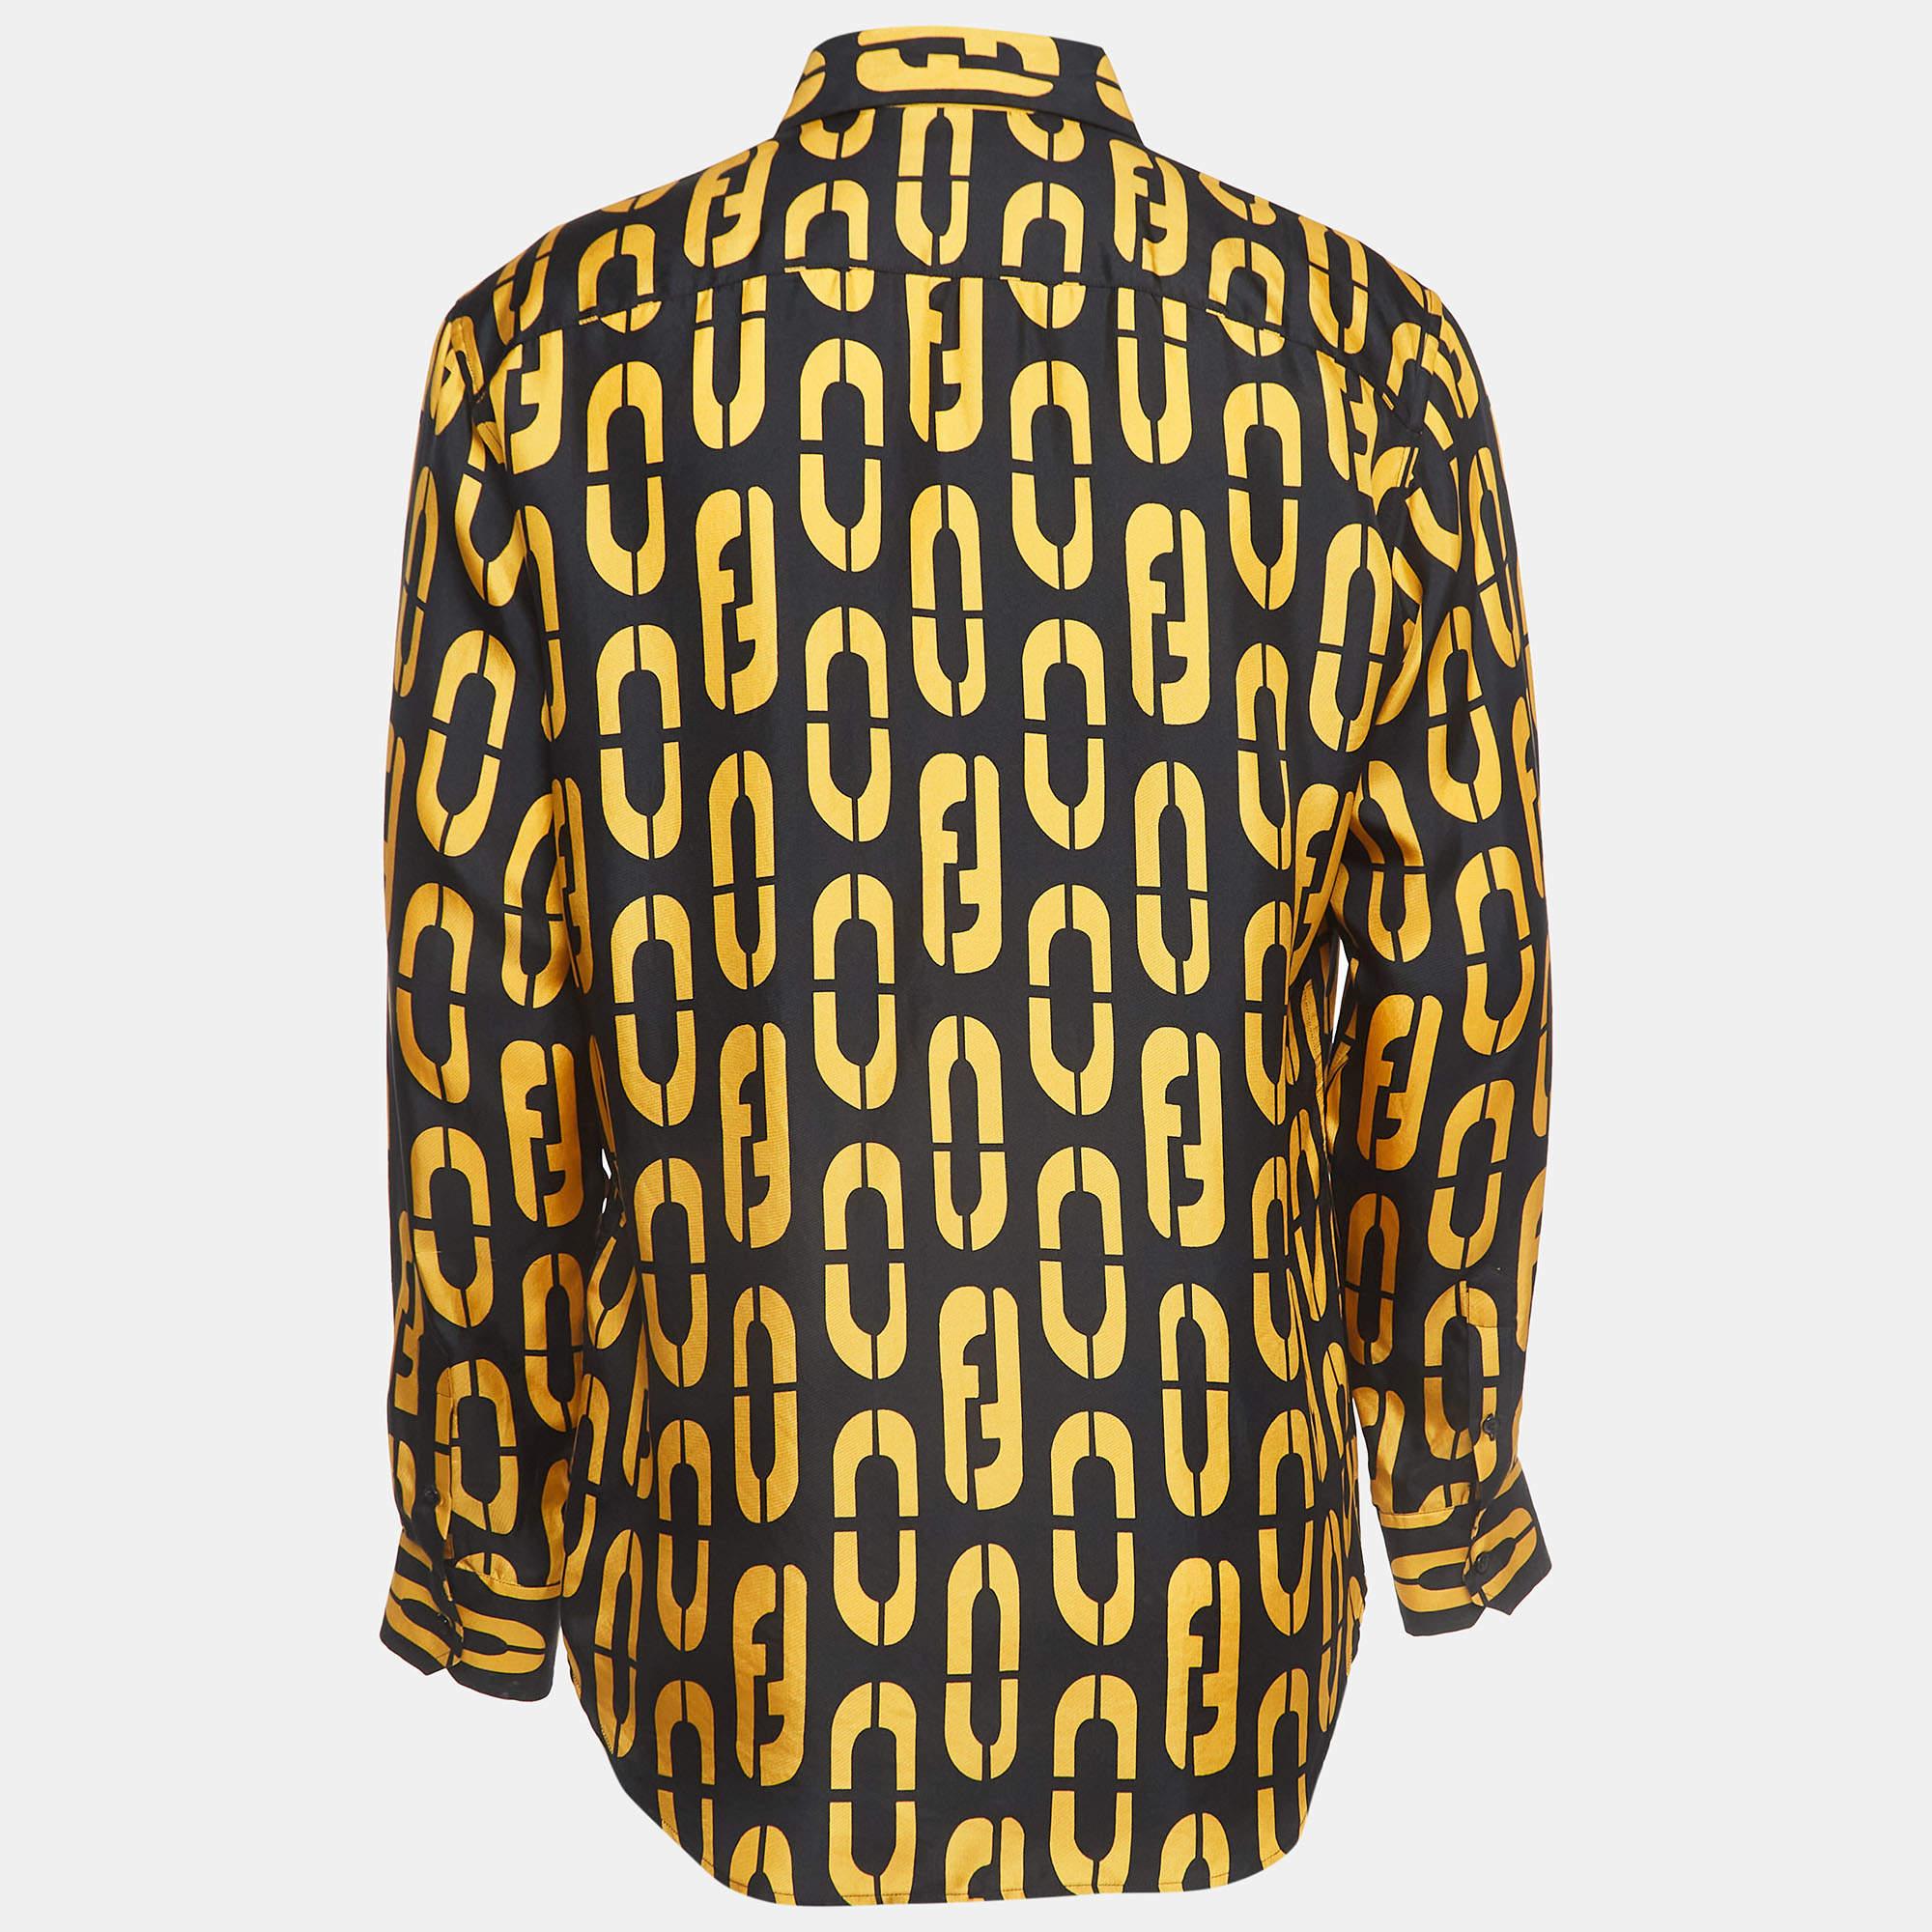 Crafted from luxurious silk, this Fendi shirt boasts a striking black and yellow logo print, exuding sophistication and style. With full sleeves adding an elegant touch, it's a statement piece perfect for making a bold impression with impeccable